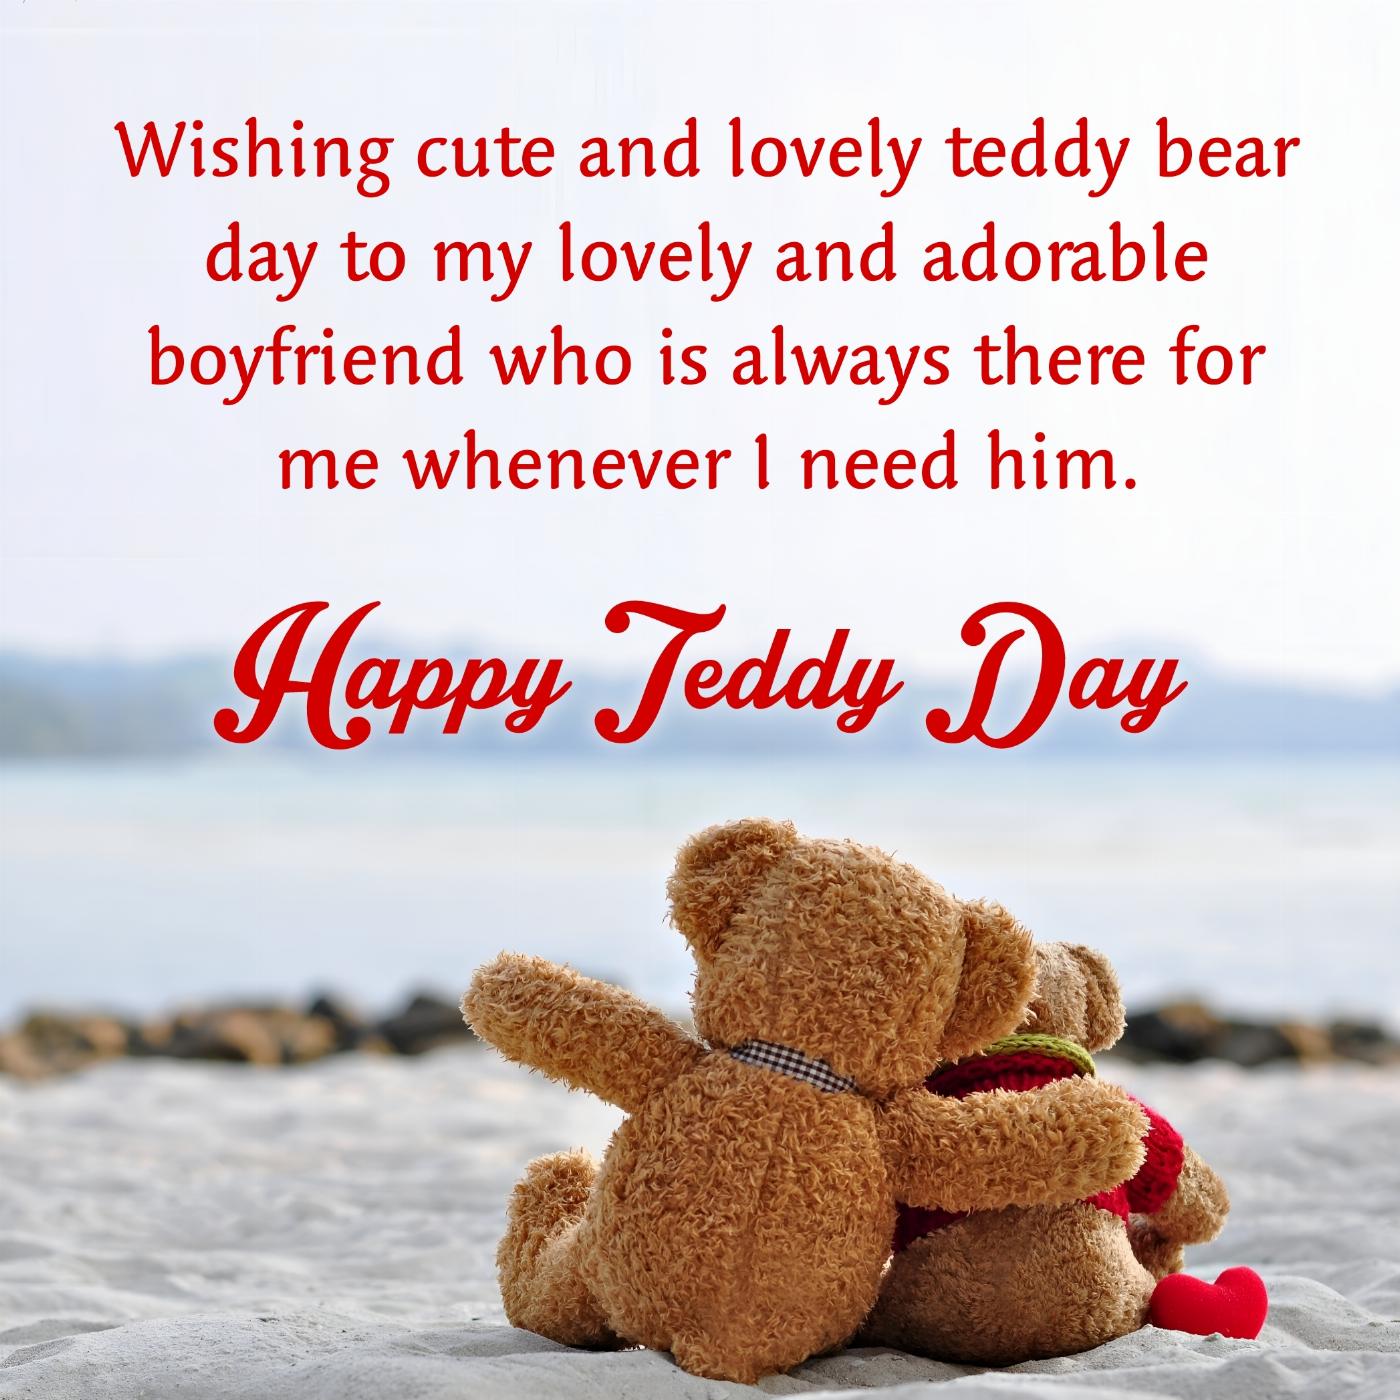 Wishing cute and lovely teddy bear day to my lovely